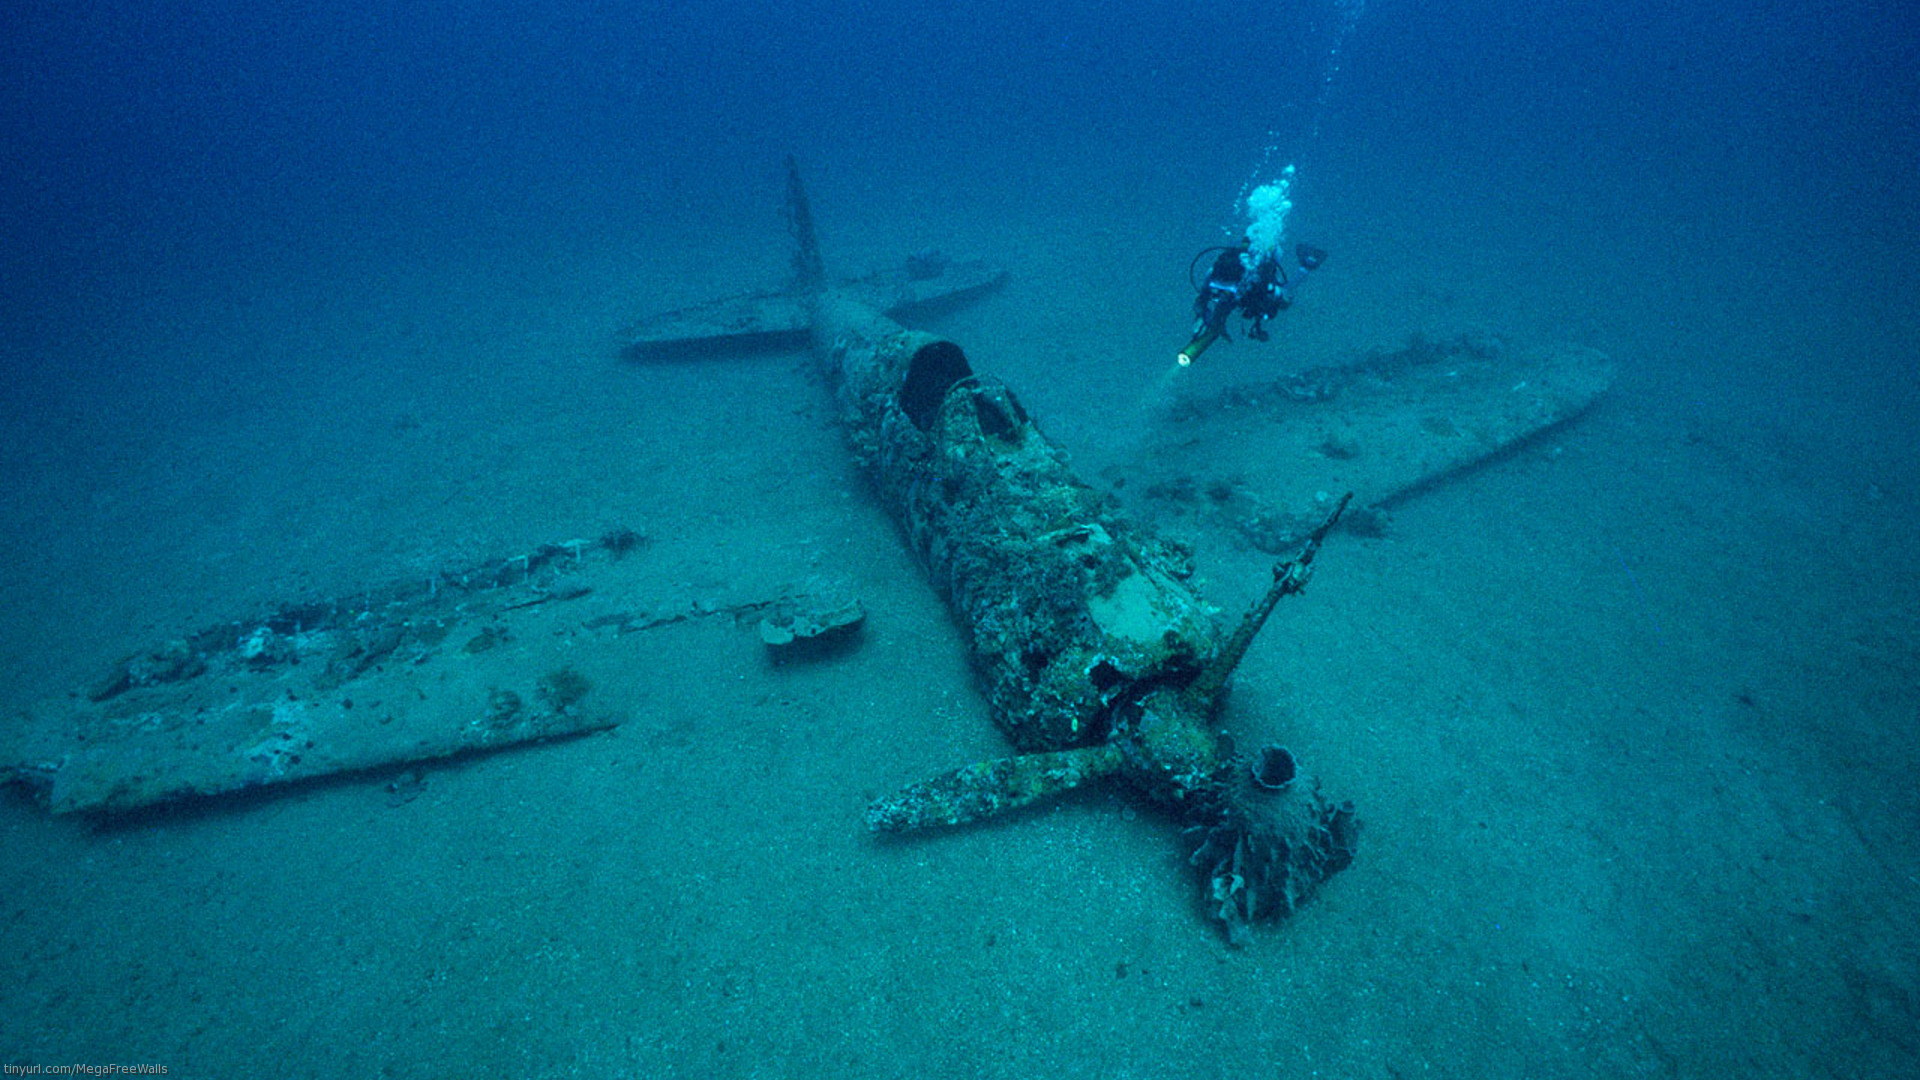 vehicles, wreck, aircraft, airplane, diver, military, underwater